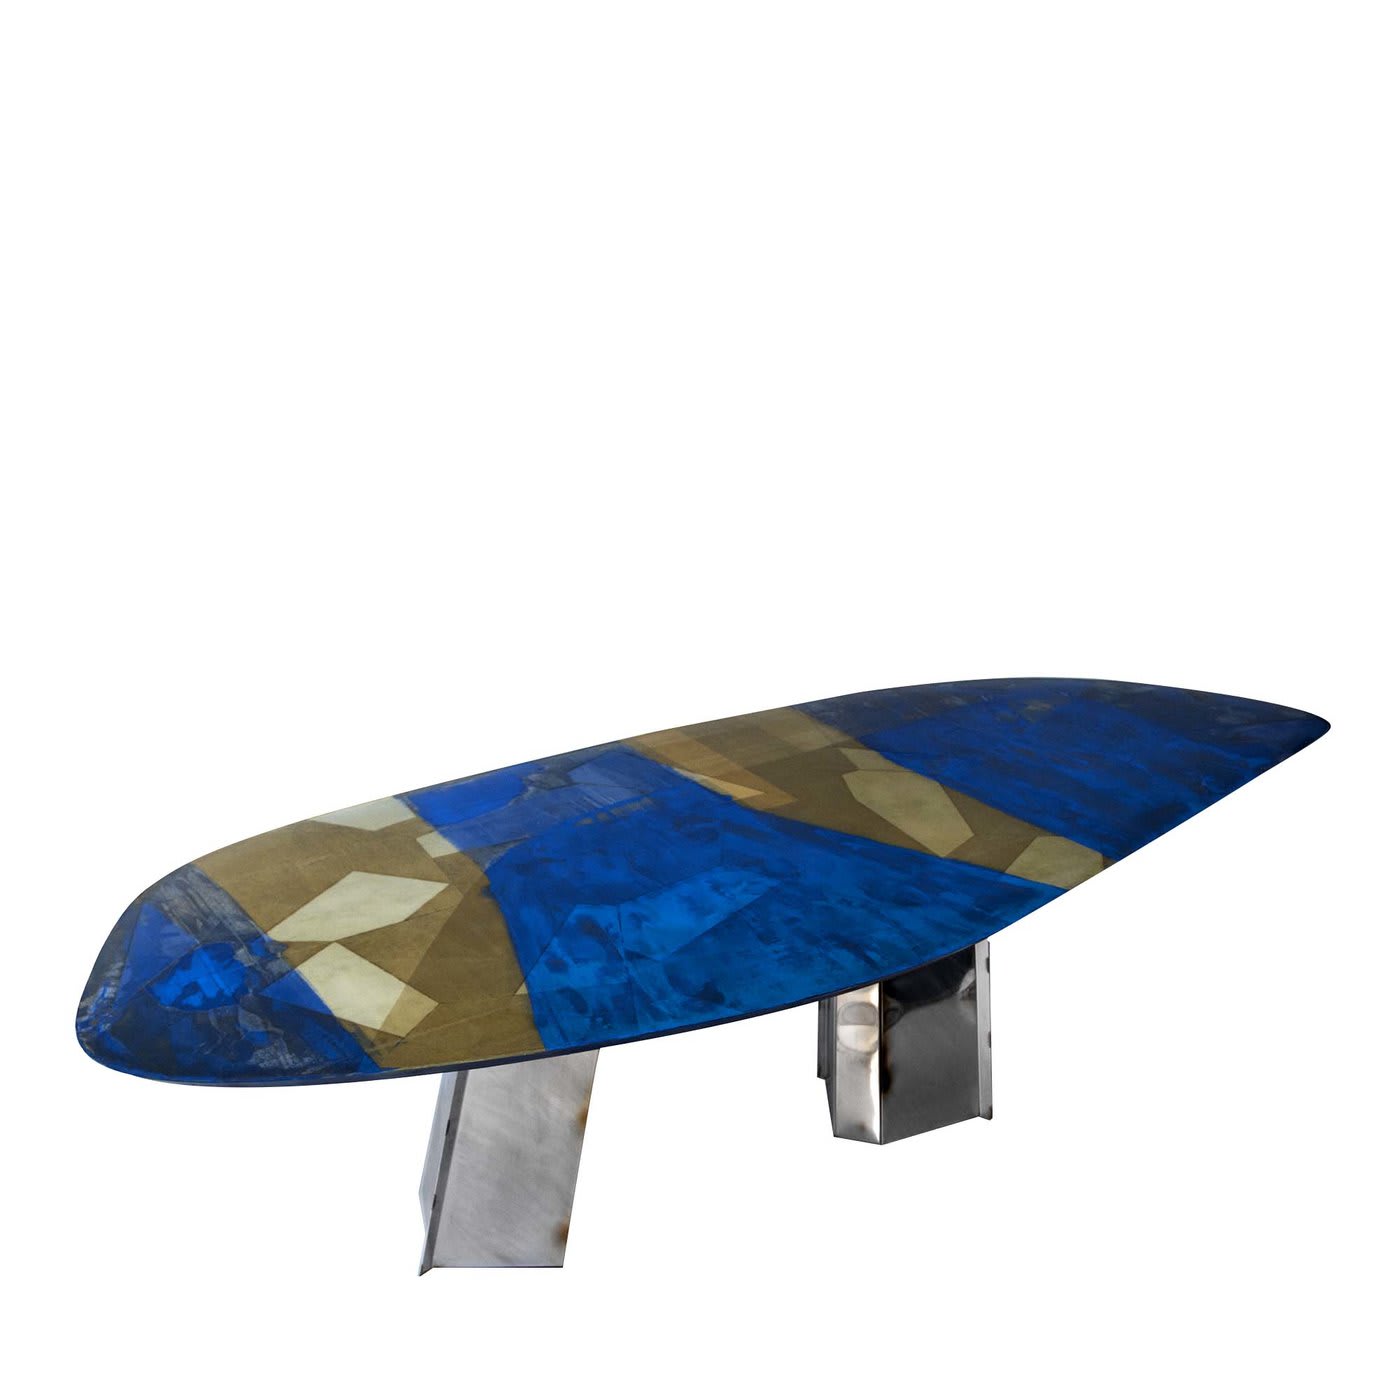 Thinking Klein Carbon and Glass Table - Frisoli